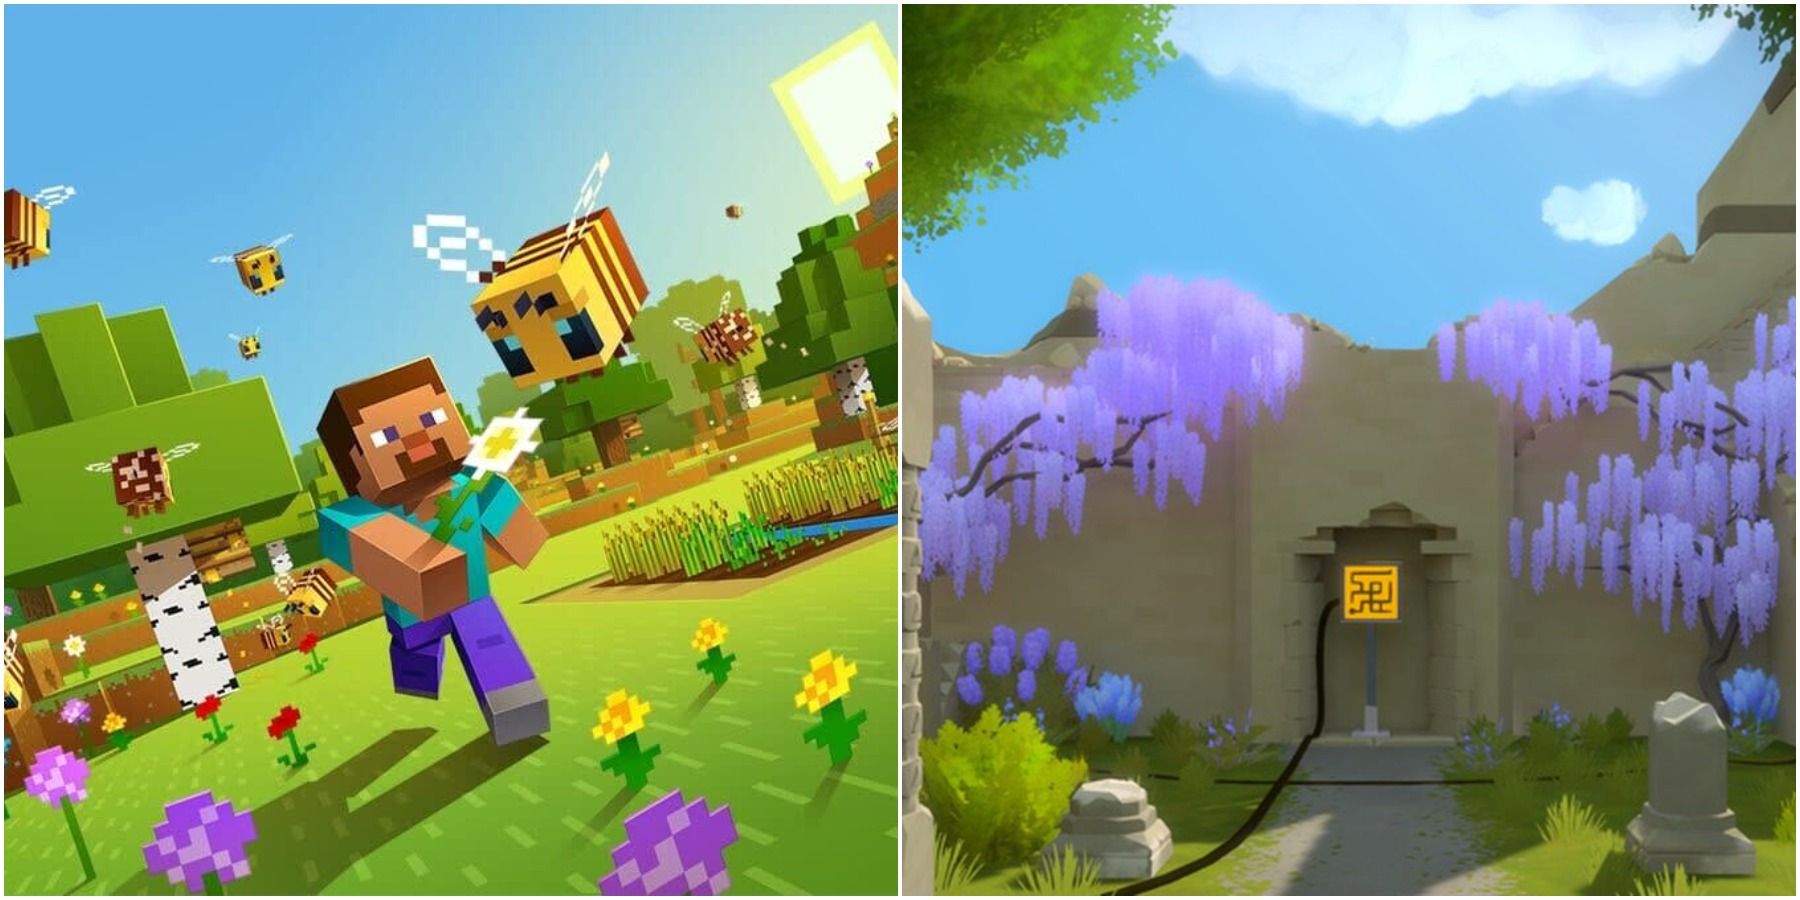 (Left) Steve chasing a bee (Right) Line puzzle from The Witness